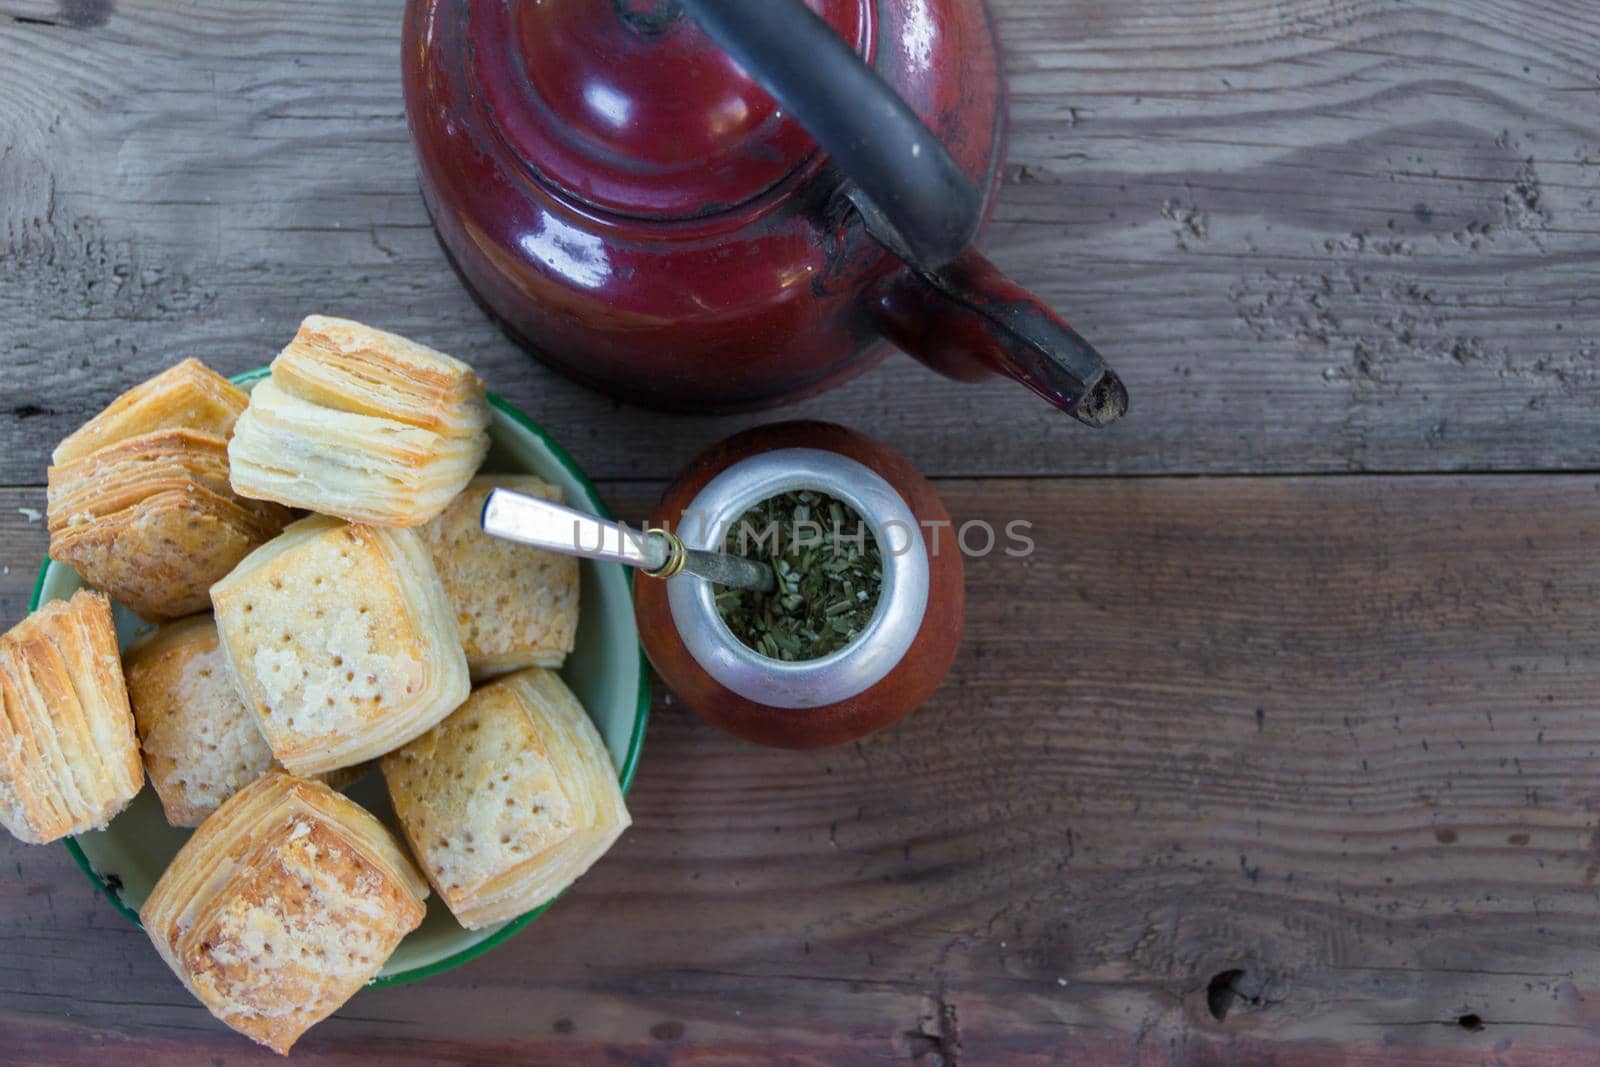 Mate and kettle with a plate of salty Argentine biscuits and yerba mate infusion